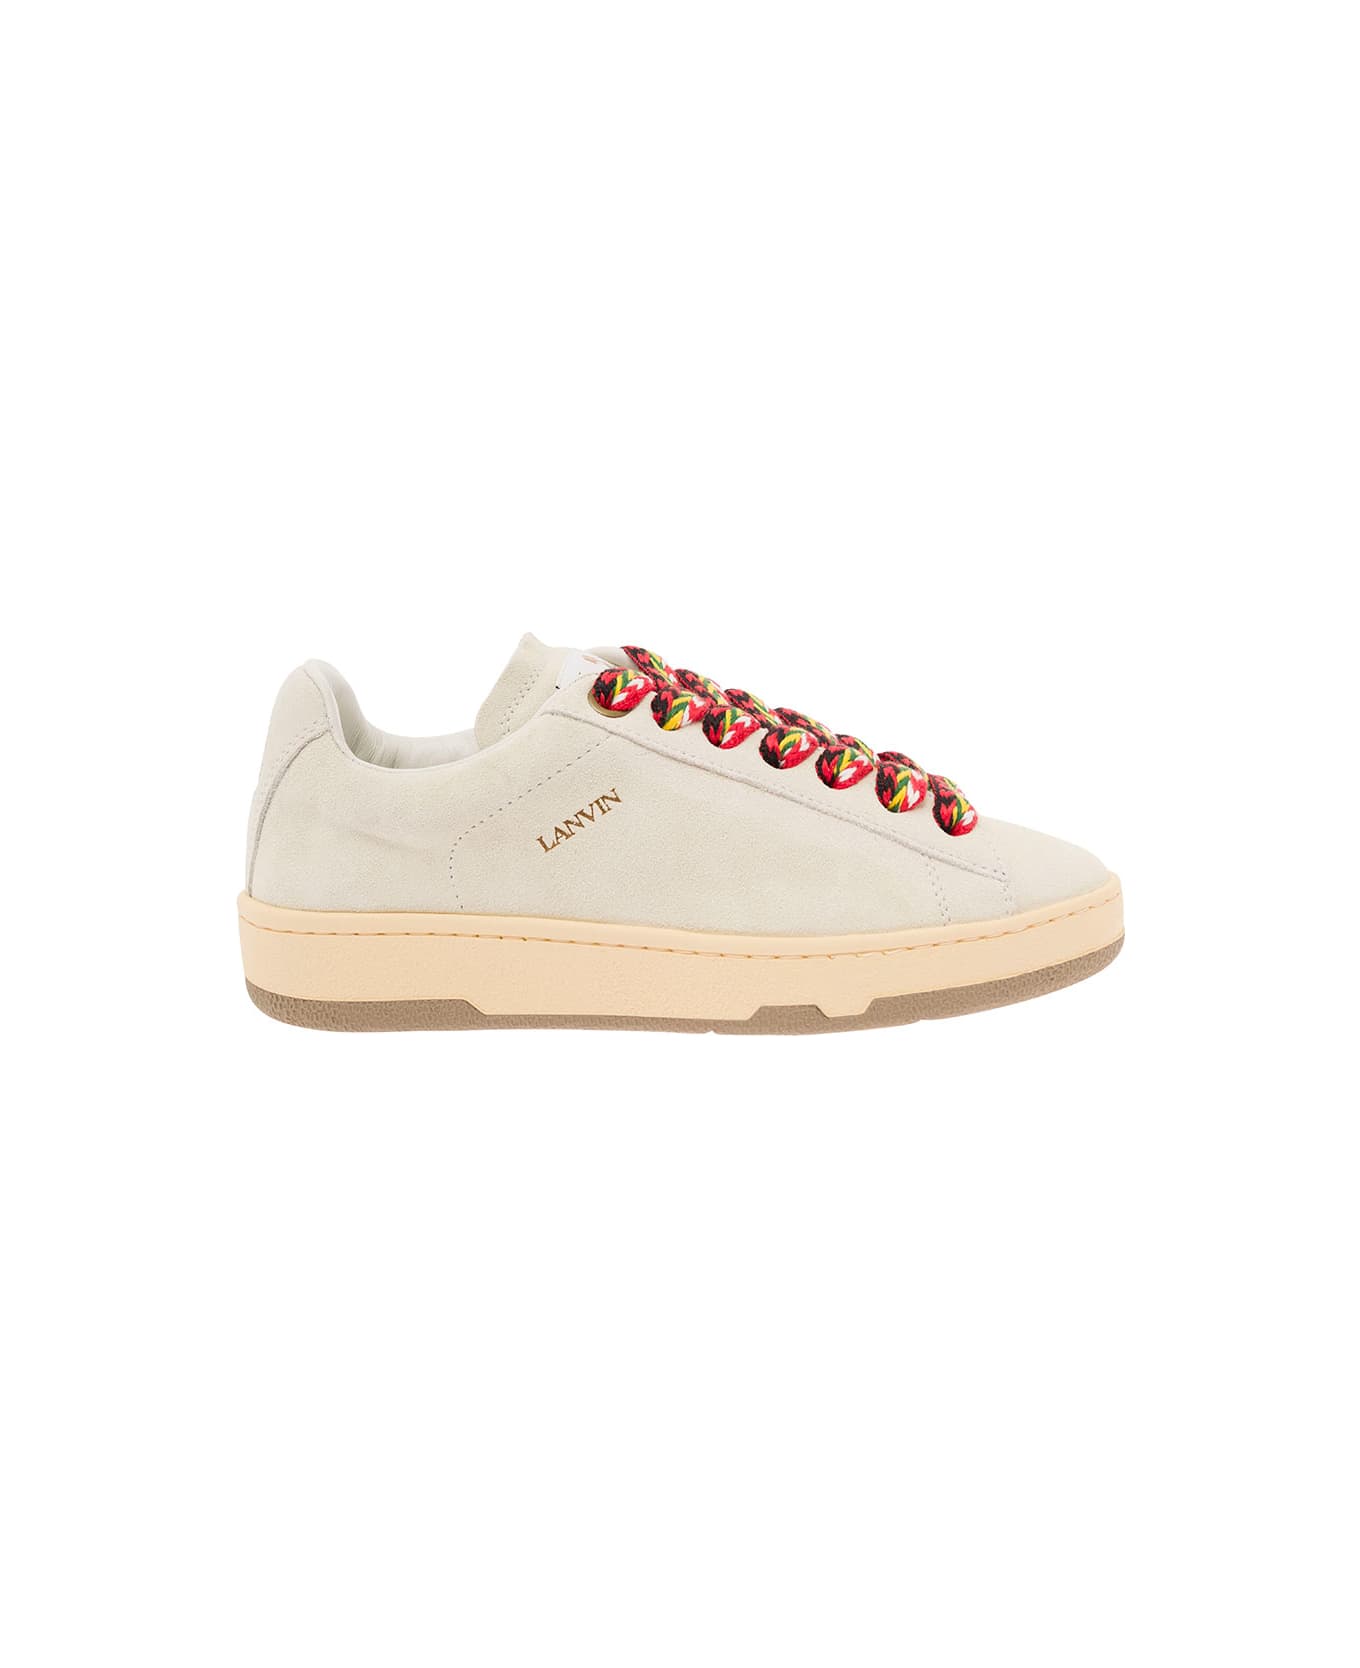 Lanvin 'lite Curb' White Low Top Sneakers With Oversized Multicolor Laces In Leather Woman - White スニーカー